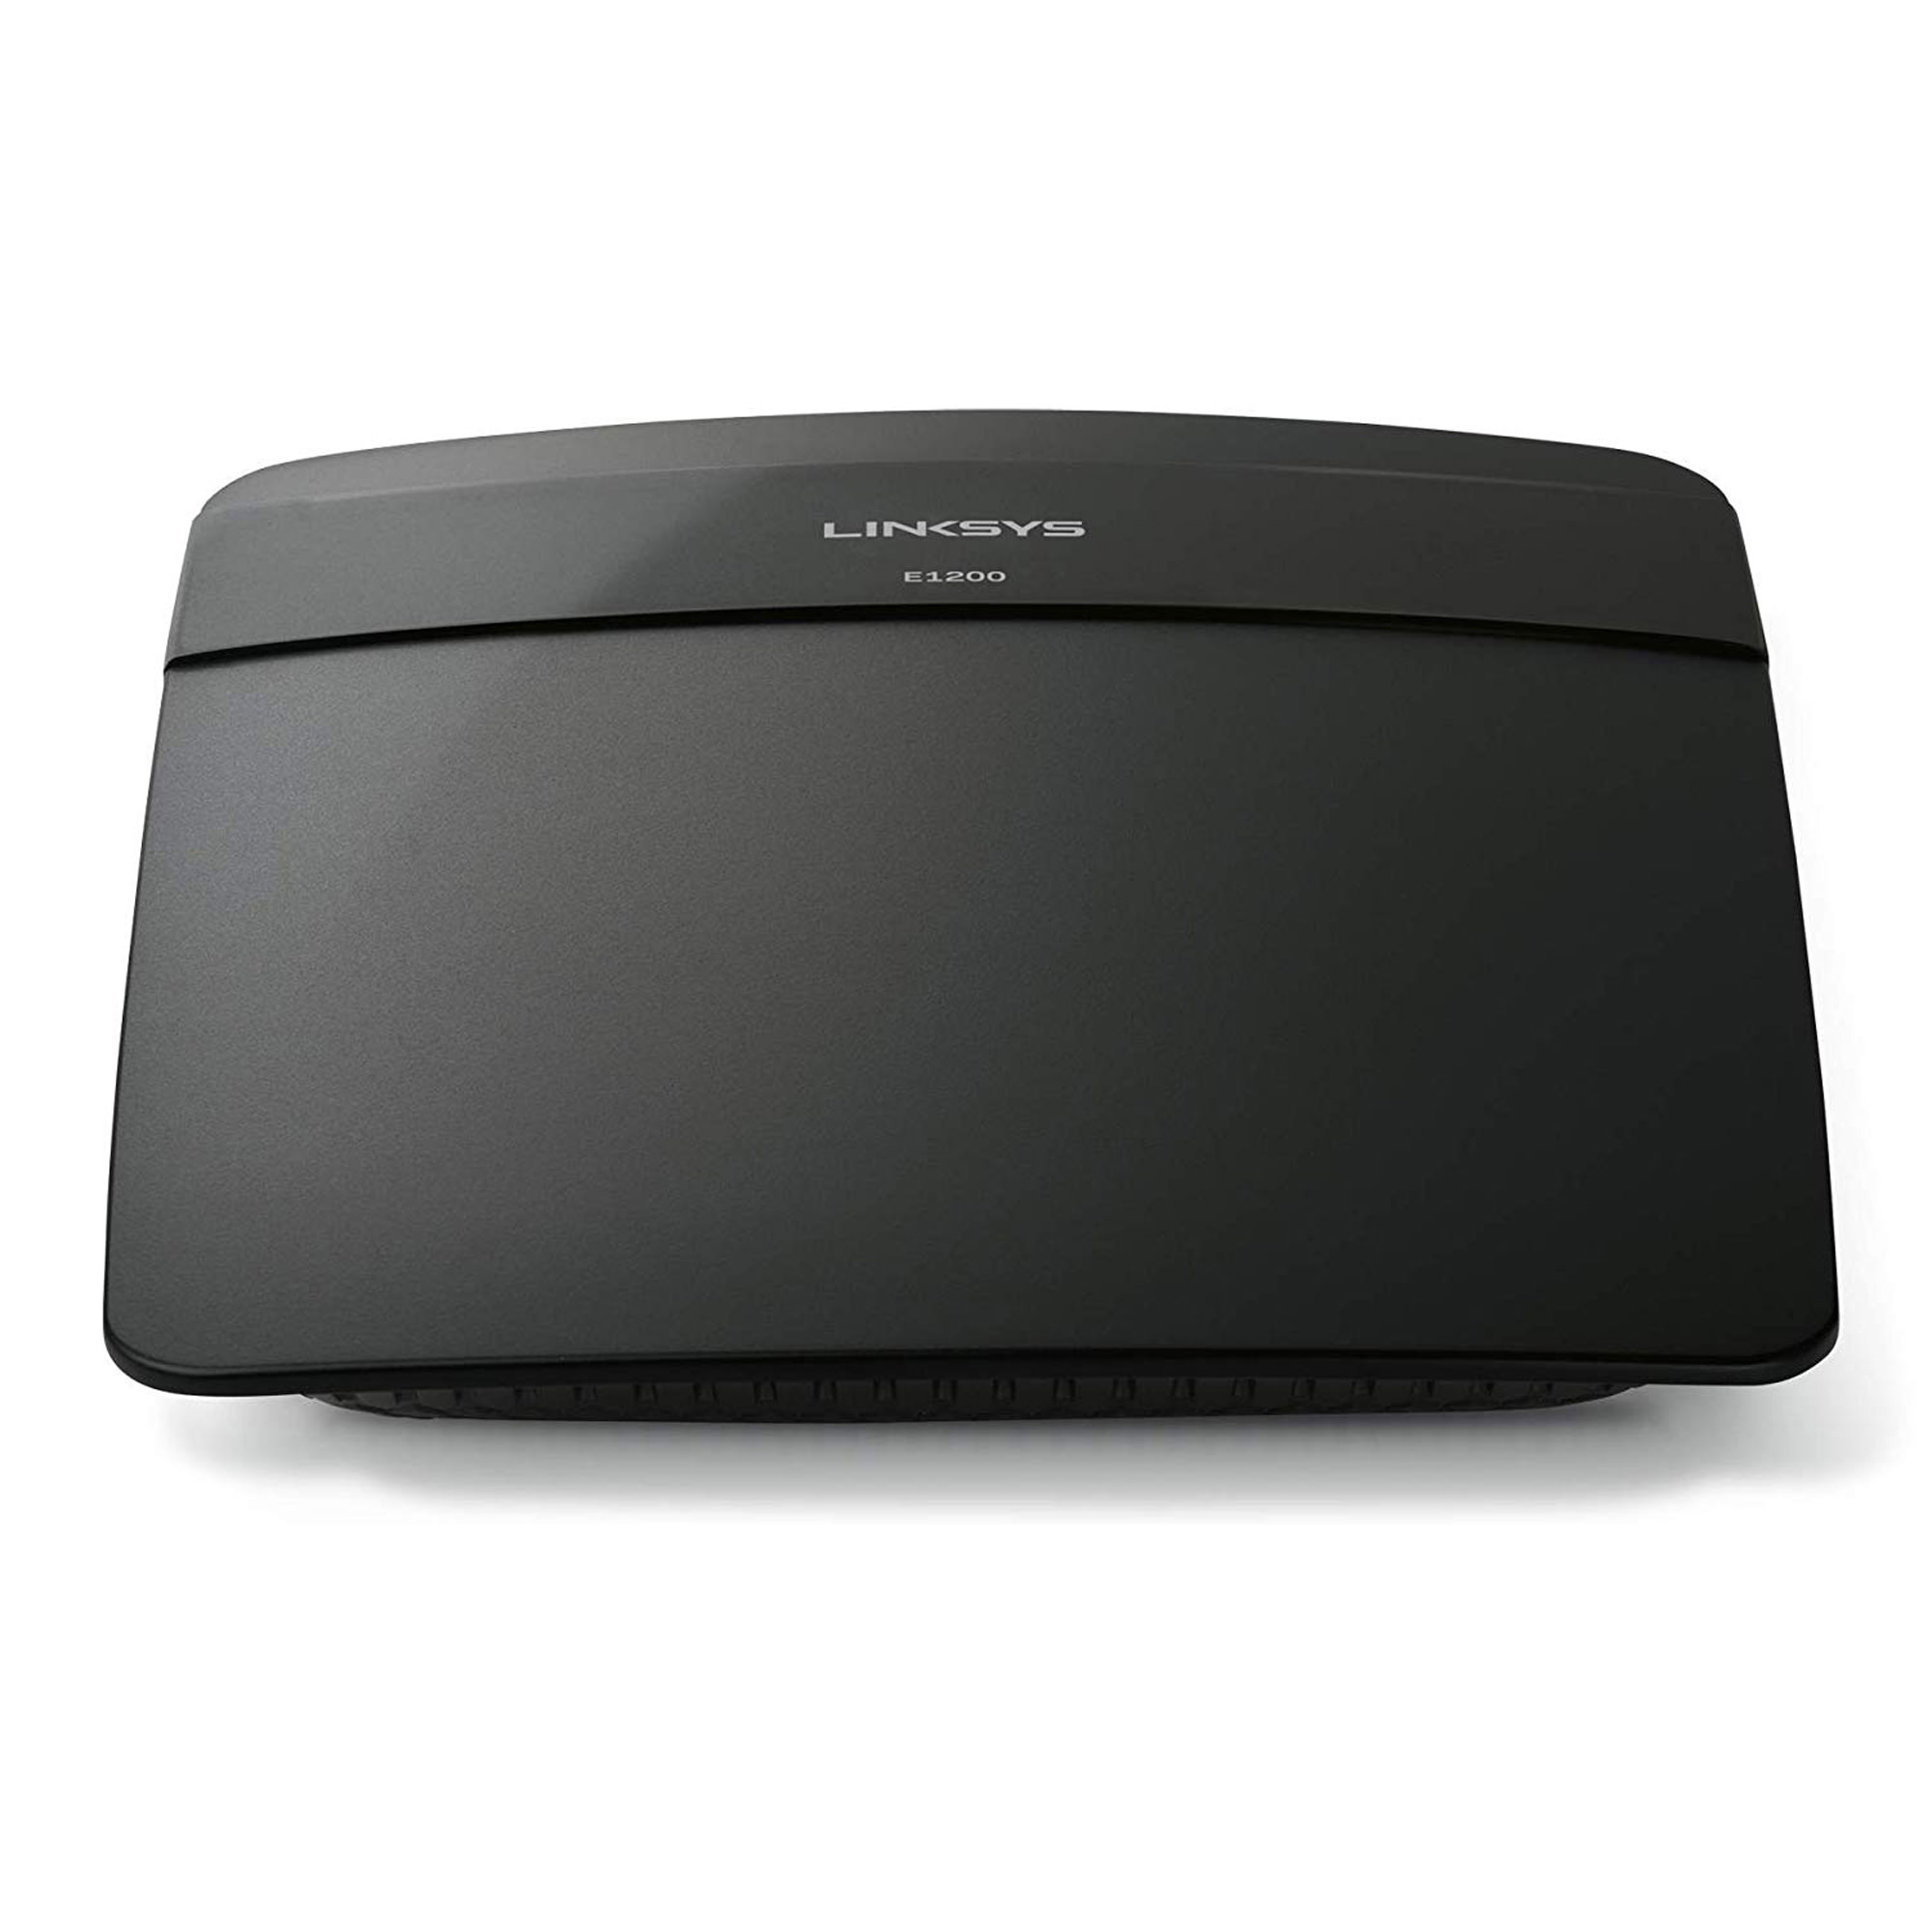 Linksys N300 Dual Band Wireless WiFi Router, Black (E1200) - image 1 of 3